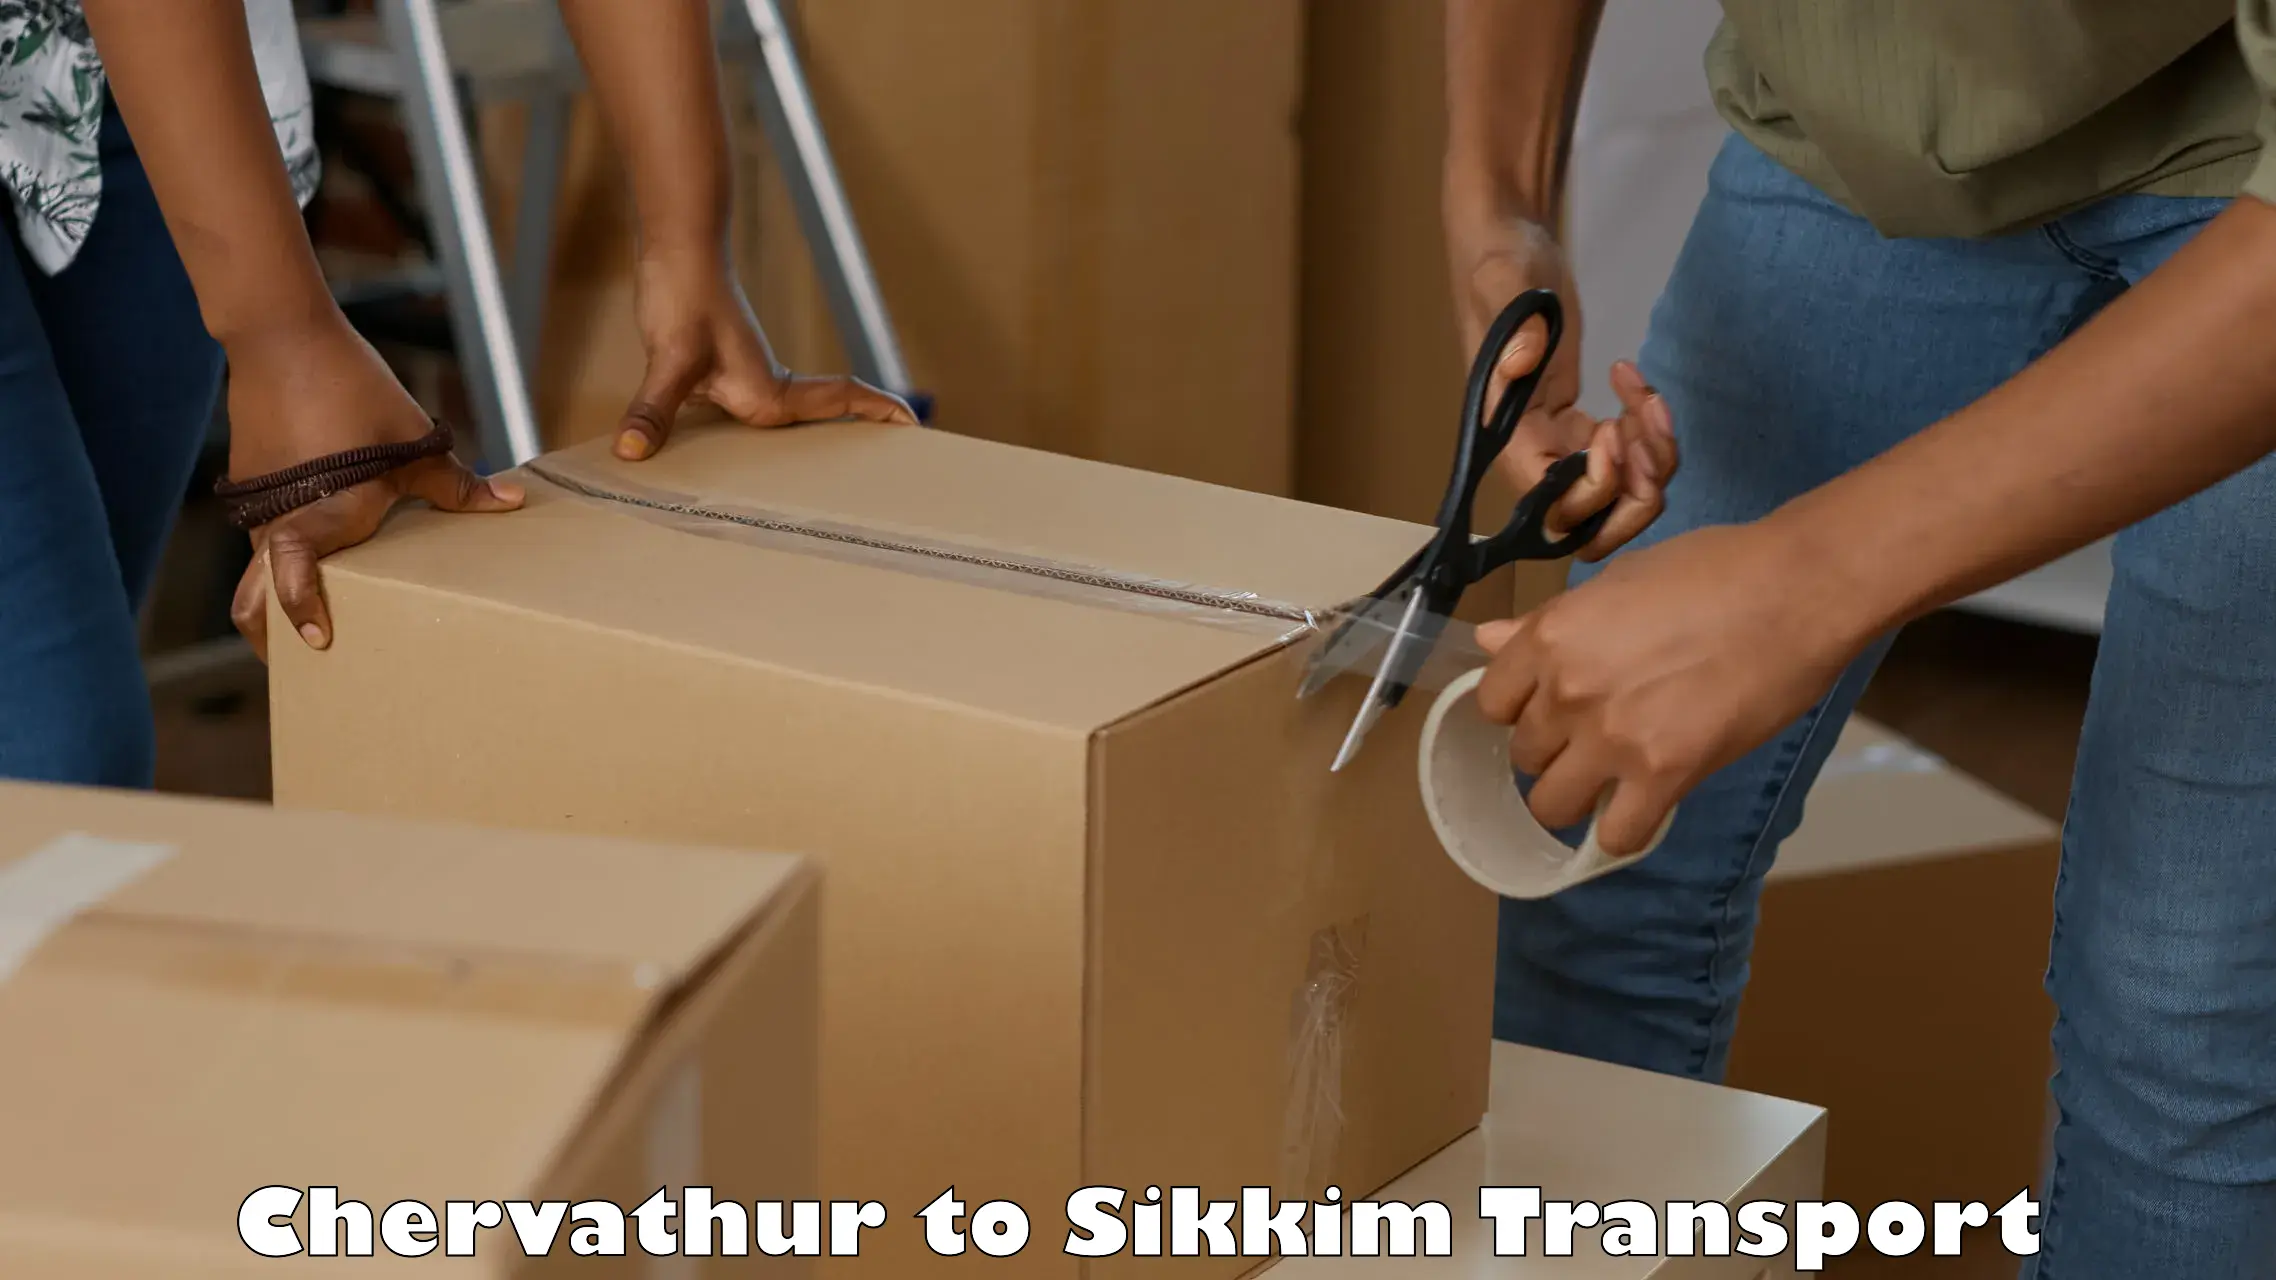 Air freight transport services Chervathur to Sikkim